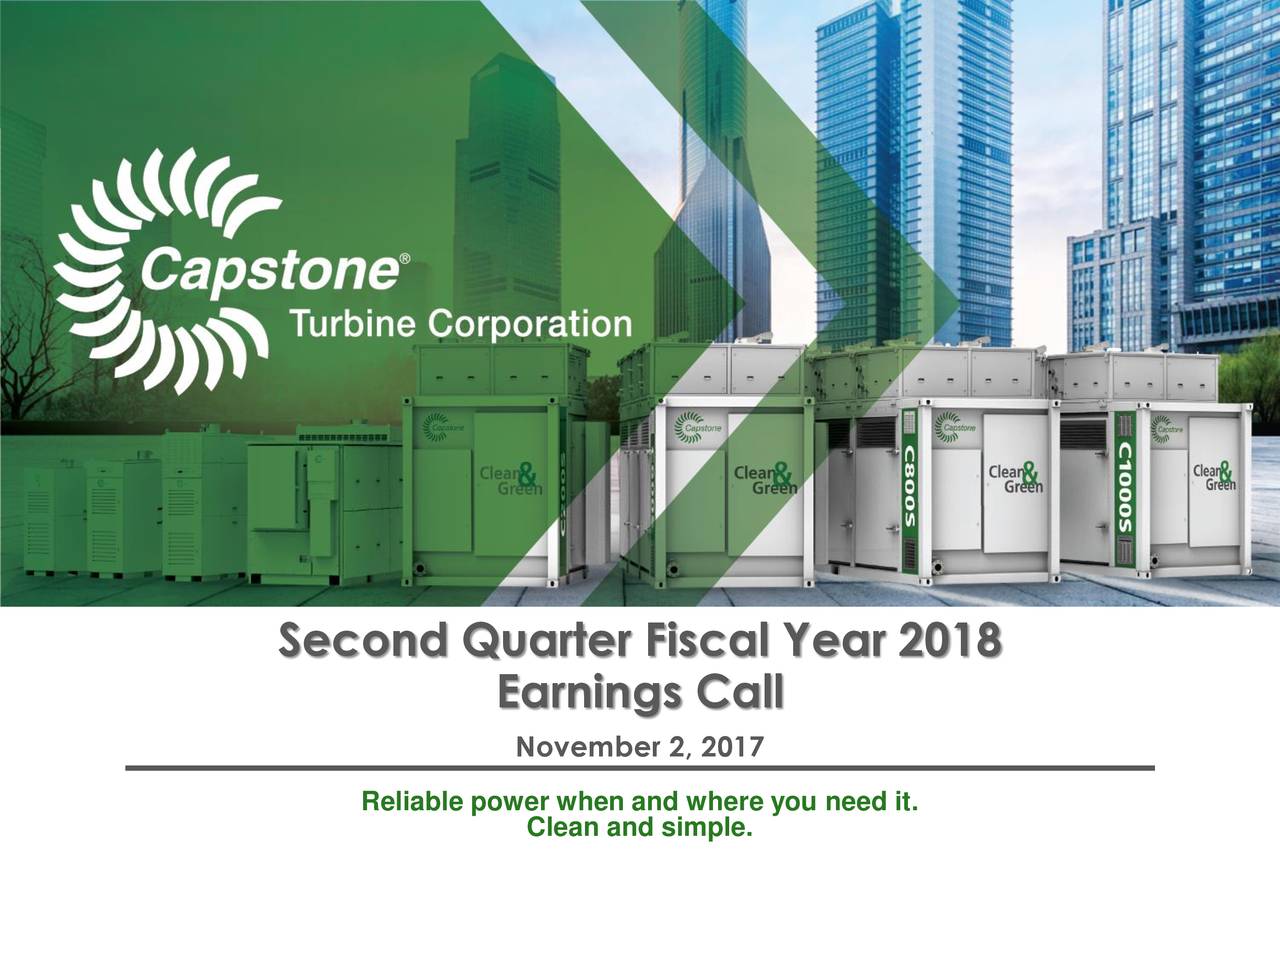 Second Quarter Fiscal Year 2018